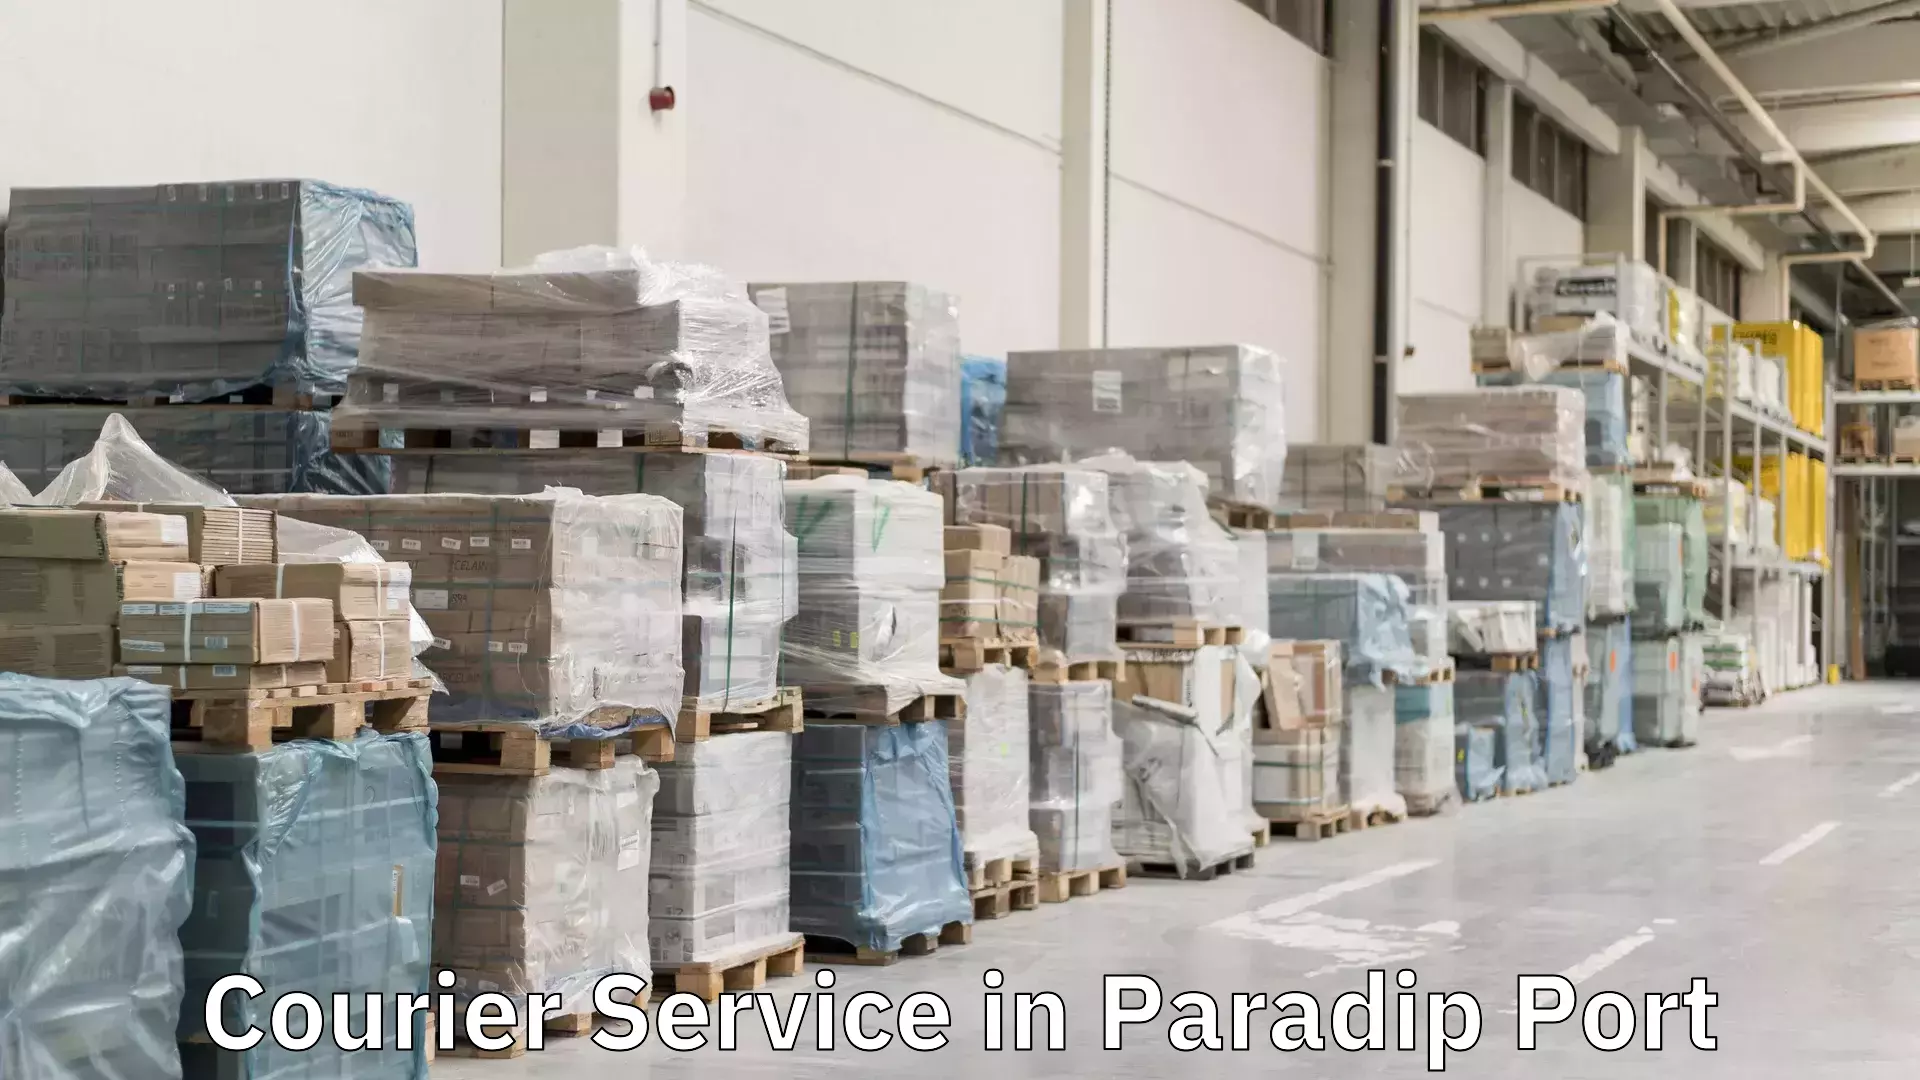 Advanced shipping services in Paradip Port